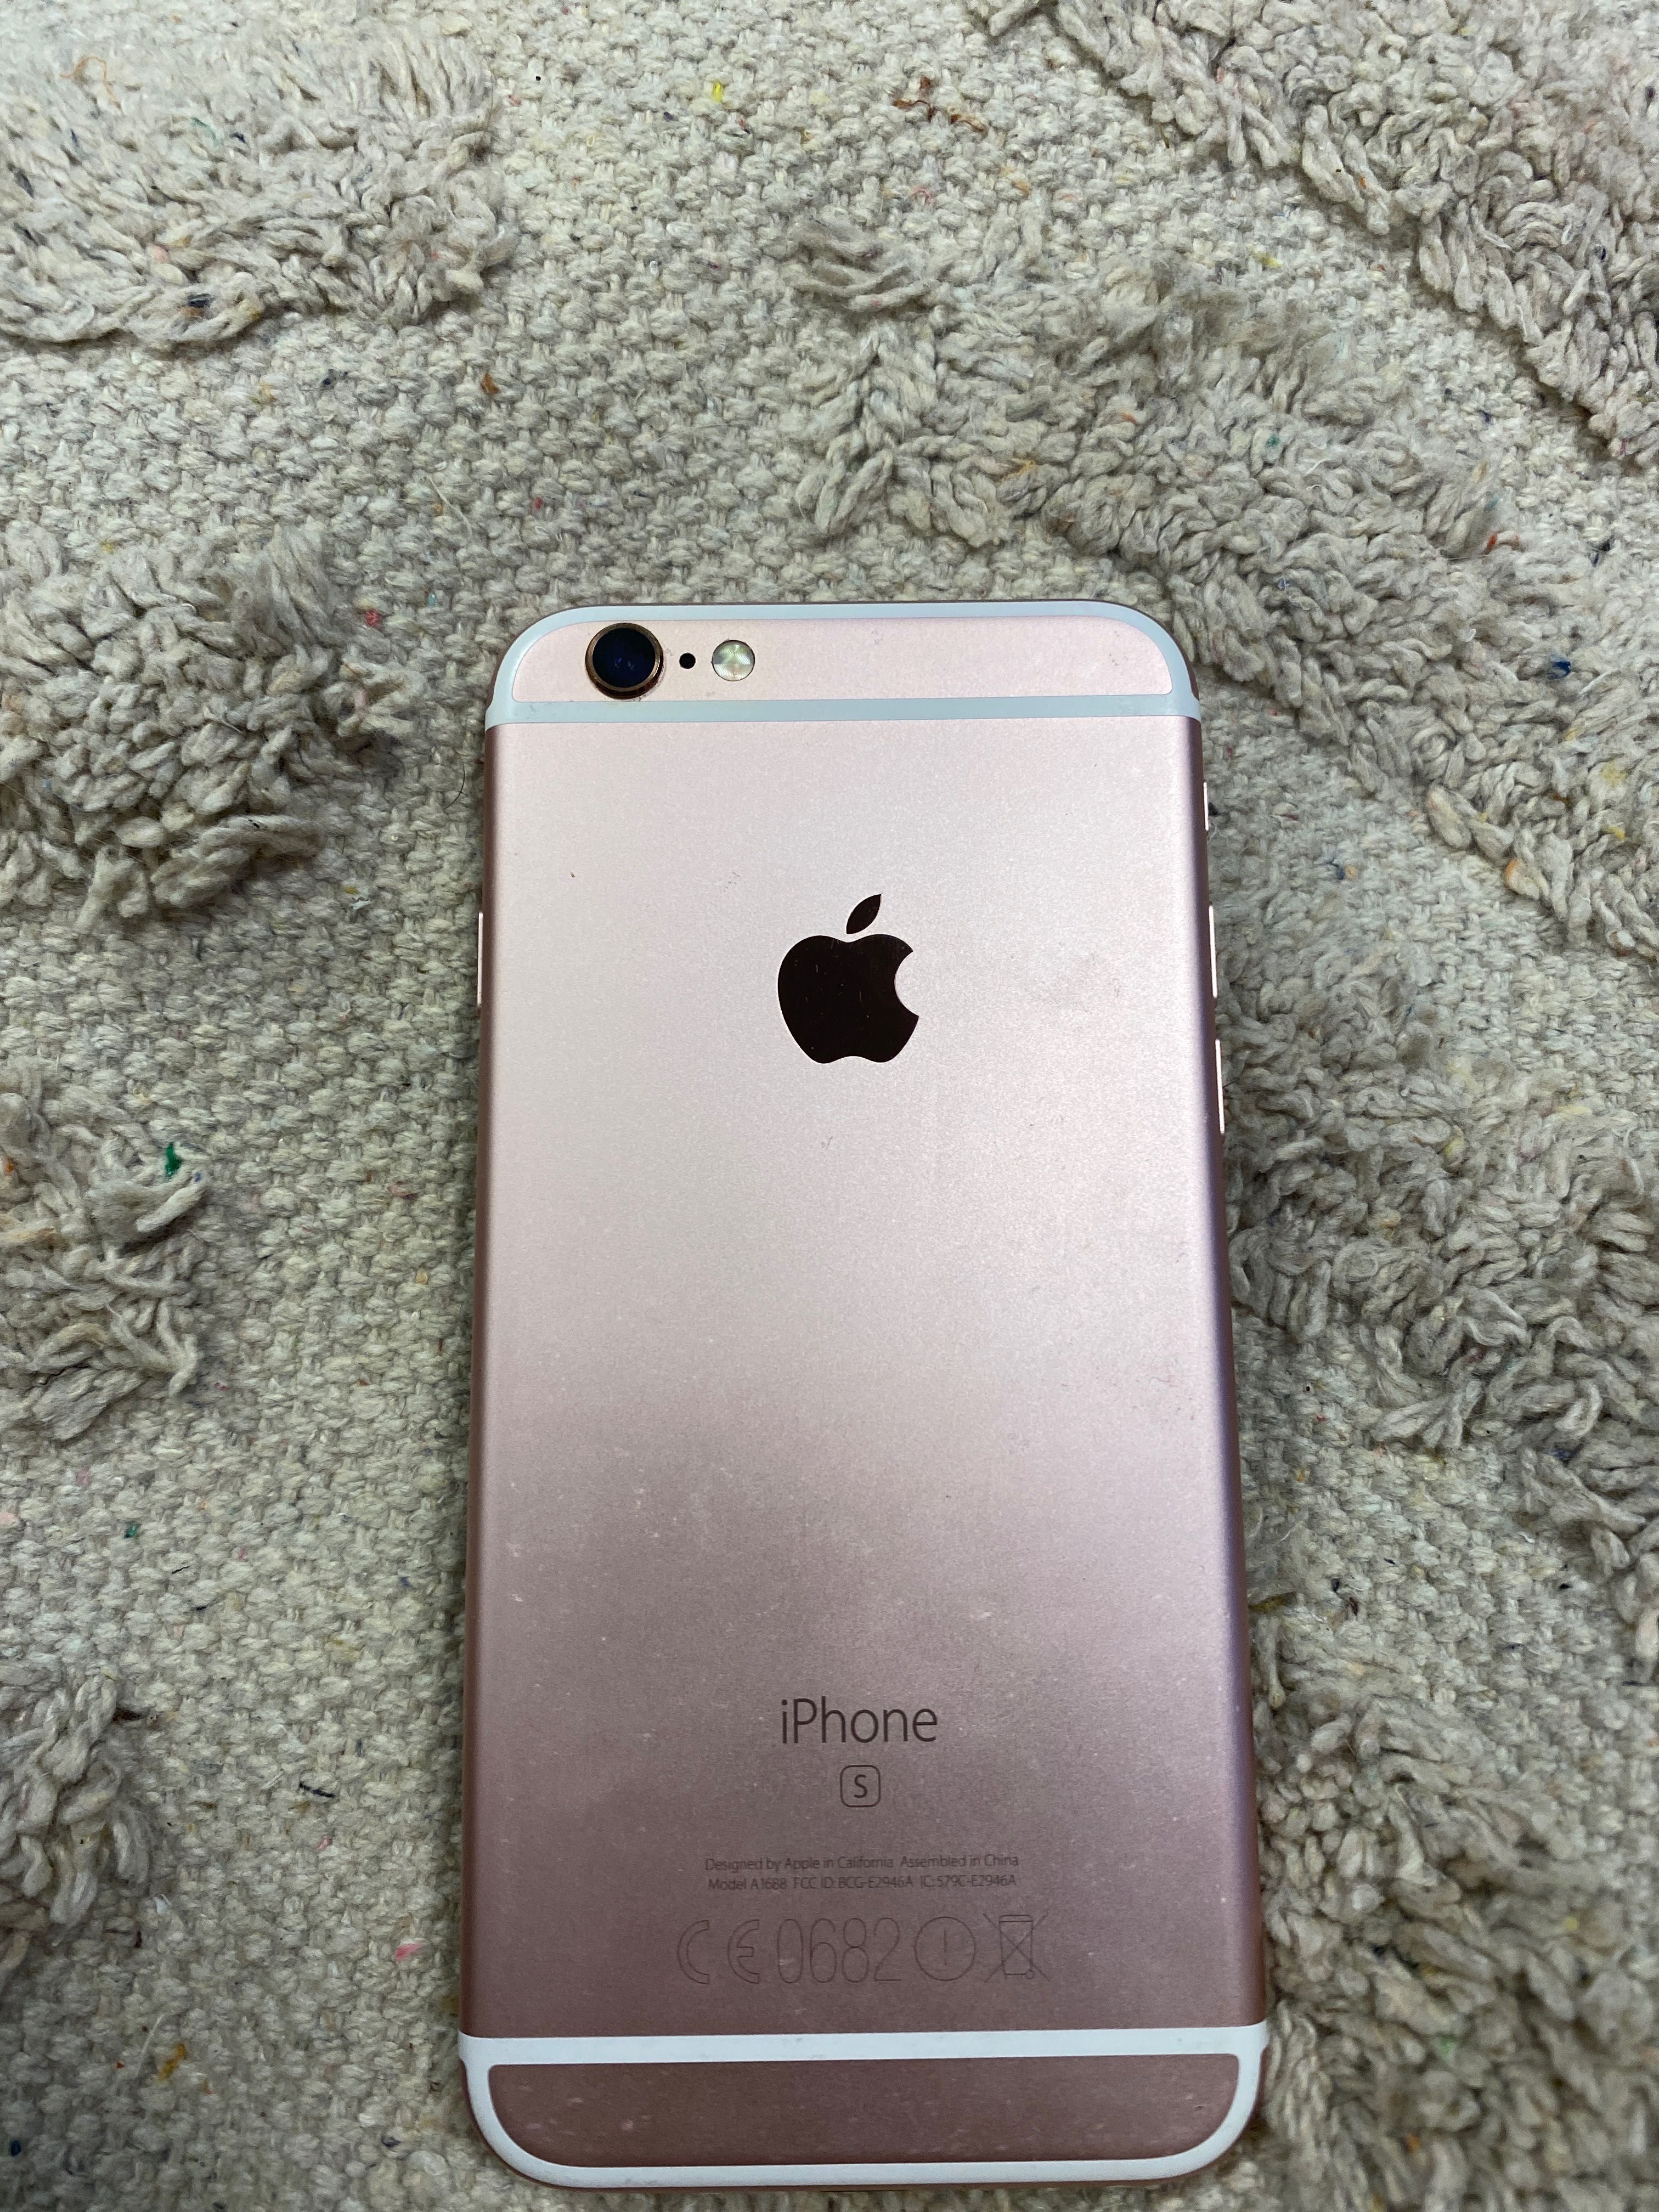 IPhone 6s pink 16gb